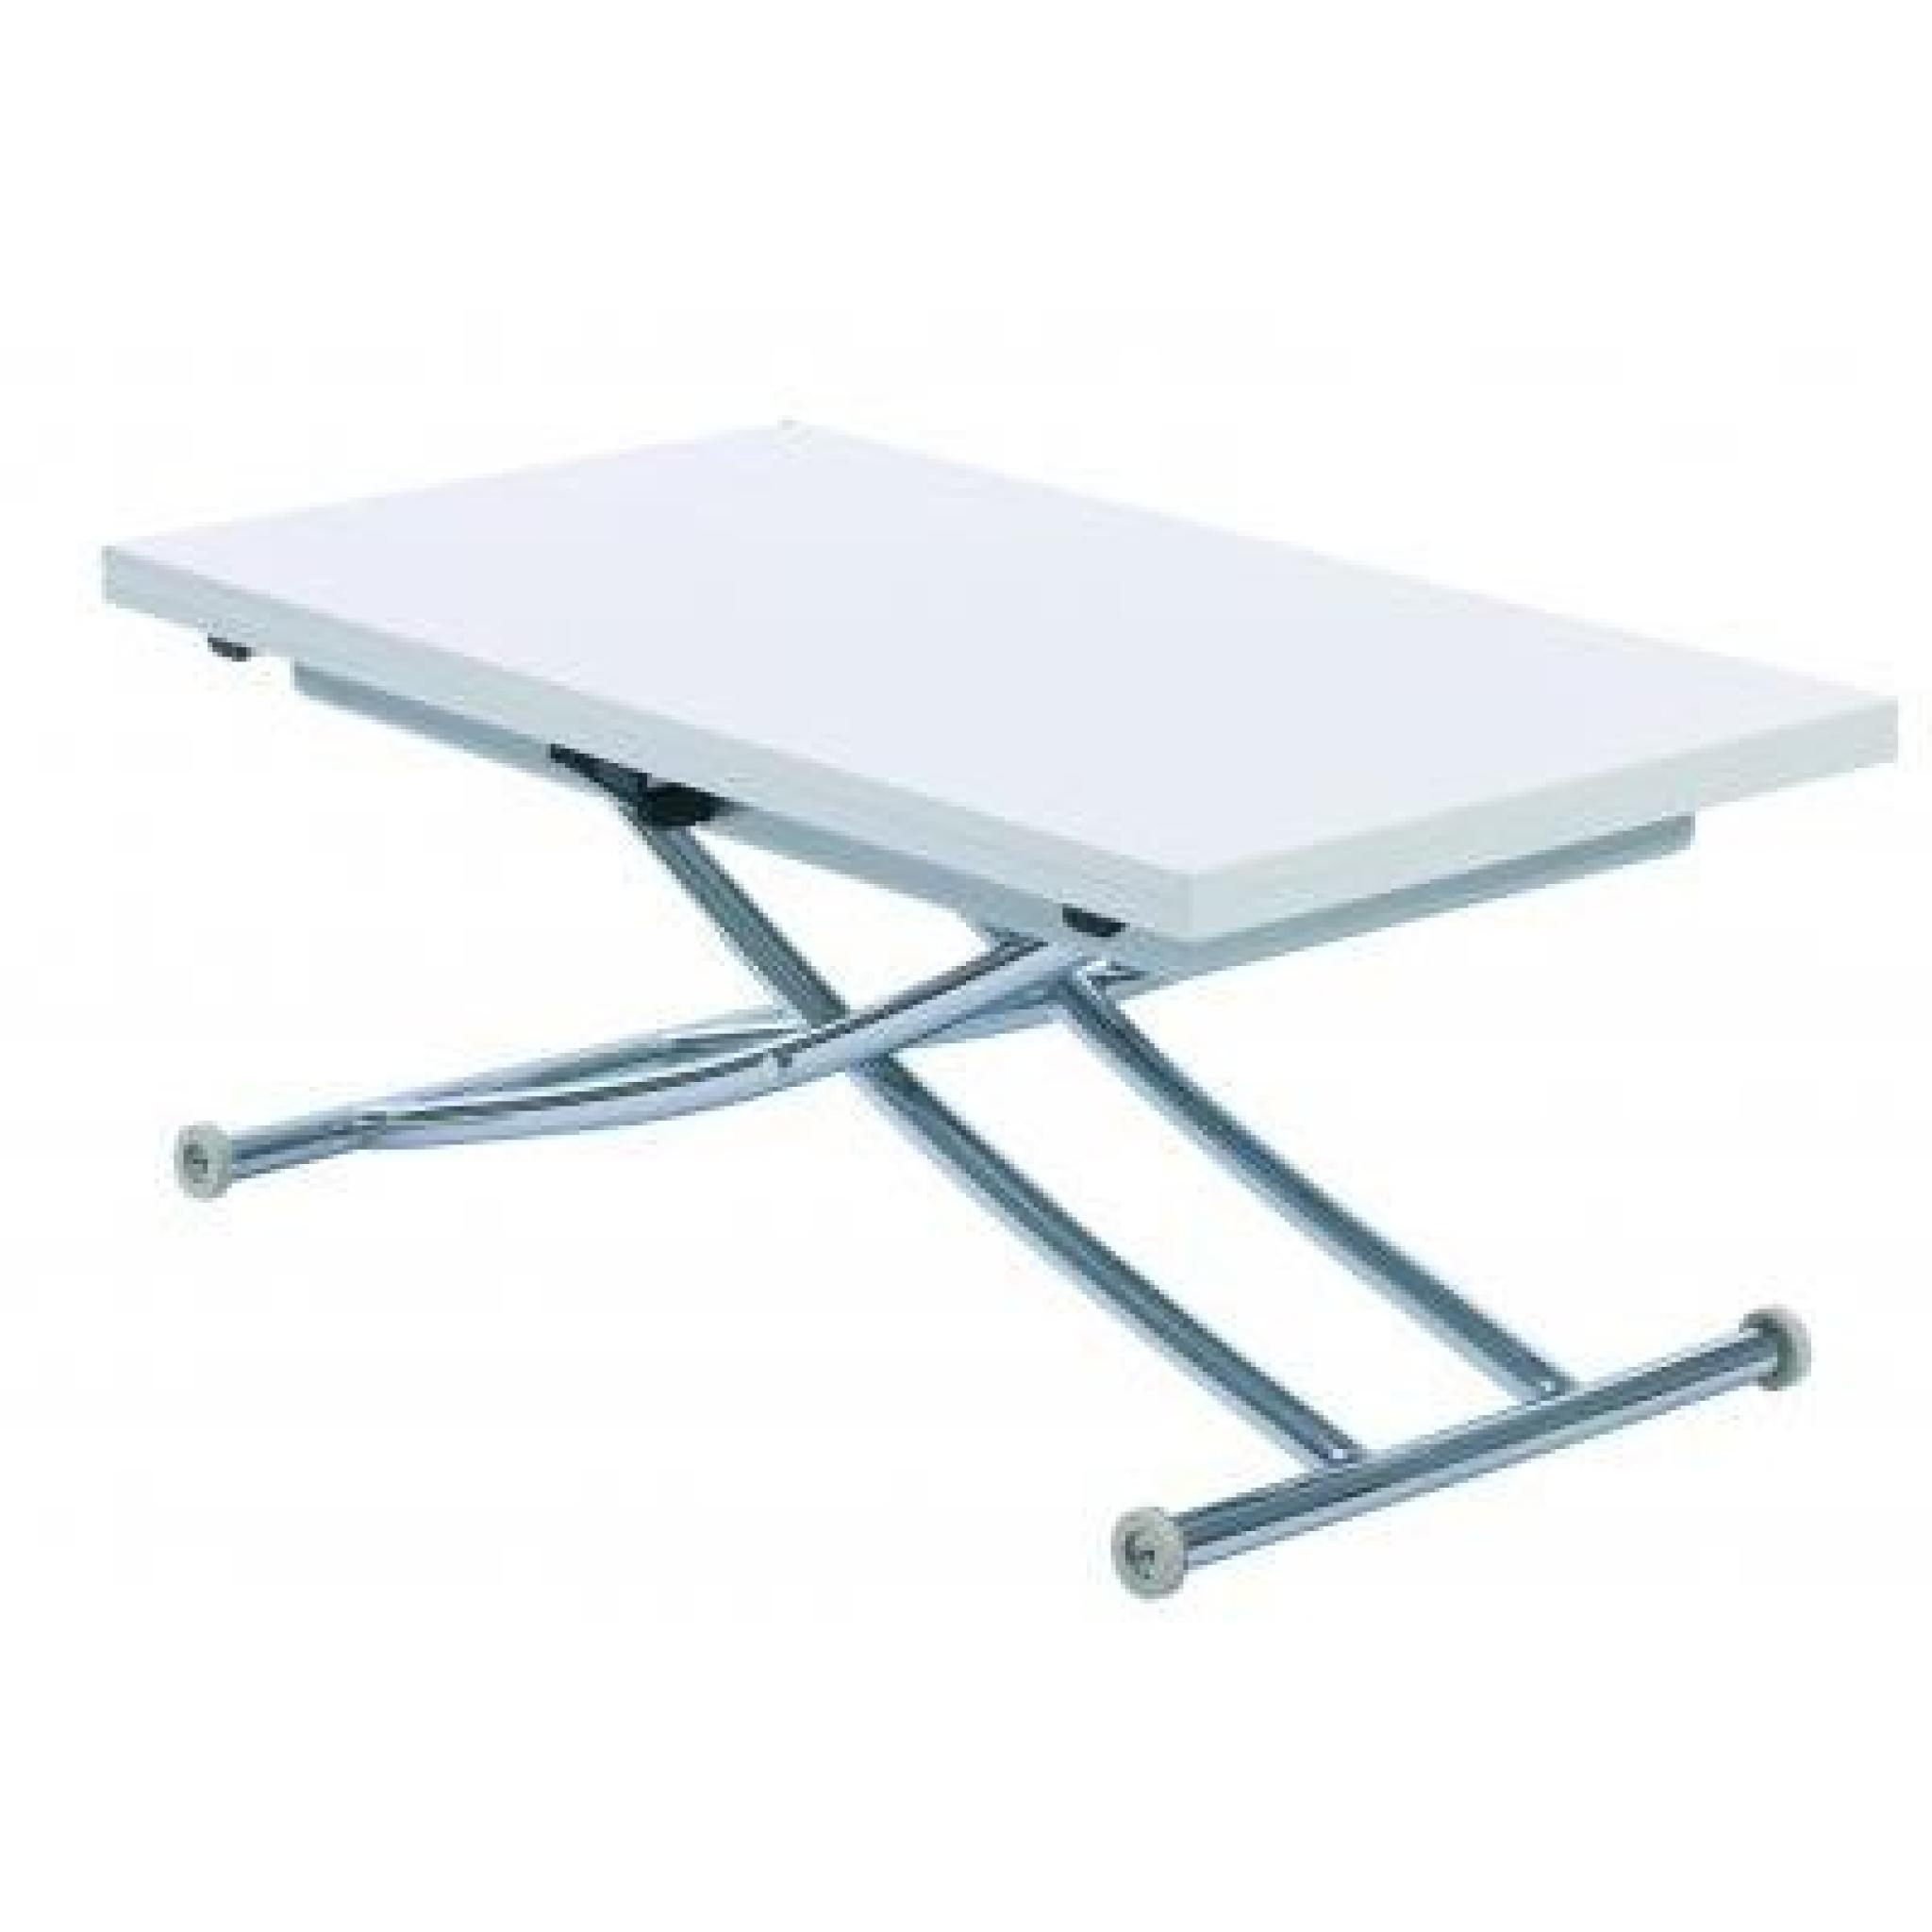 TABLE AJUSTABLE RECTANGULAIRE